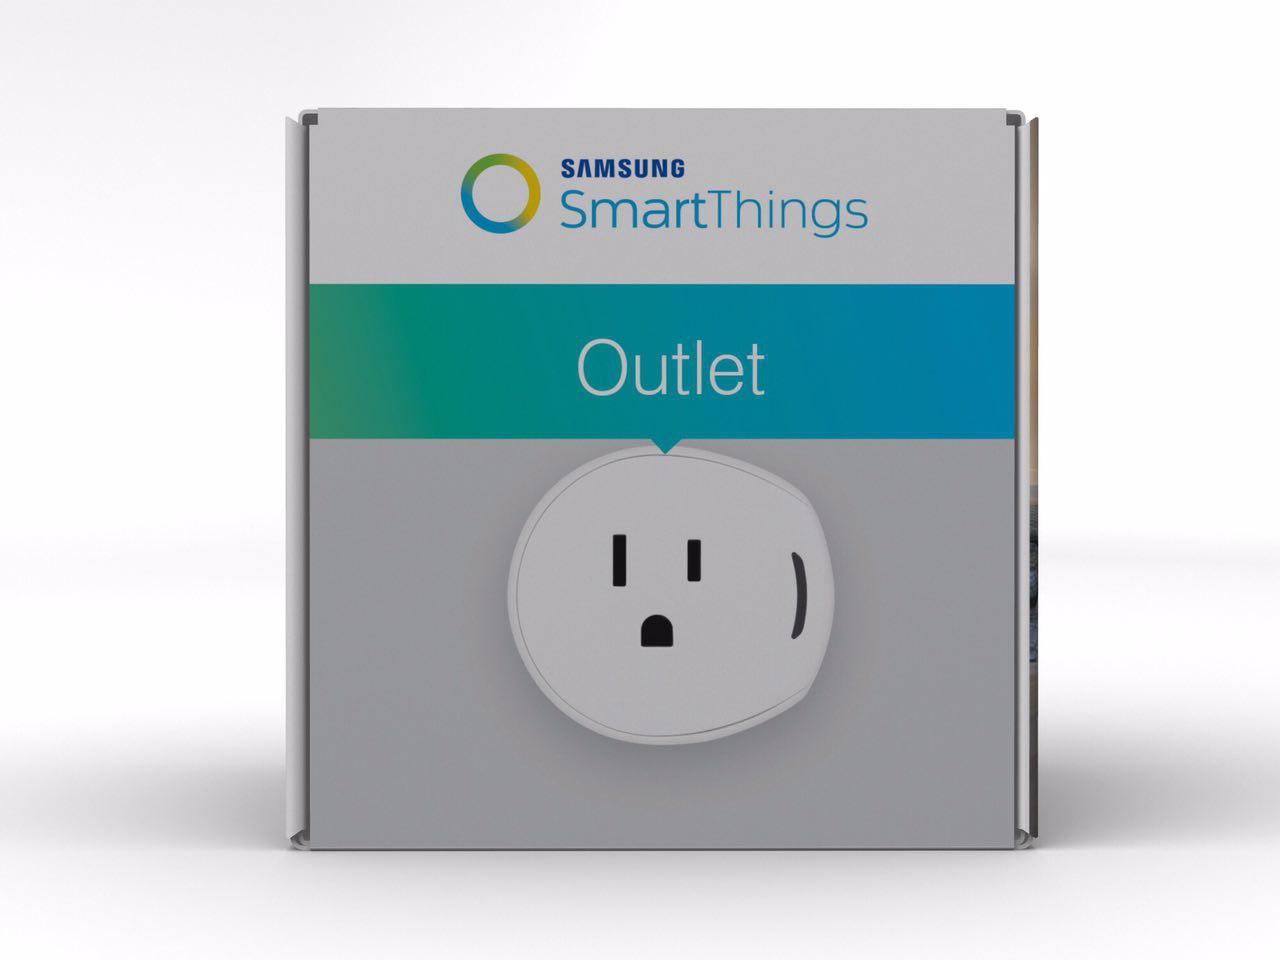 https://image-us.samsung.com/SamsungUS/home/smart-home/smartthings/outlets/pd/f-out-us-2/gallery/1_New_Outlet_1_5_packaging_100517.jpg